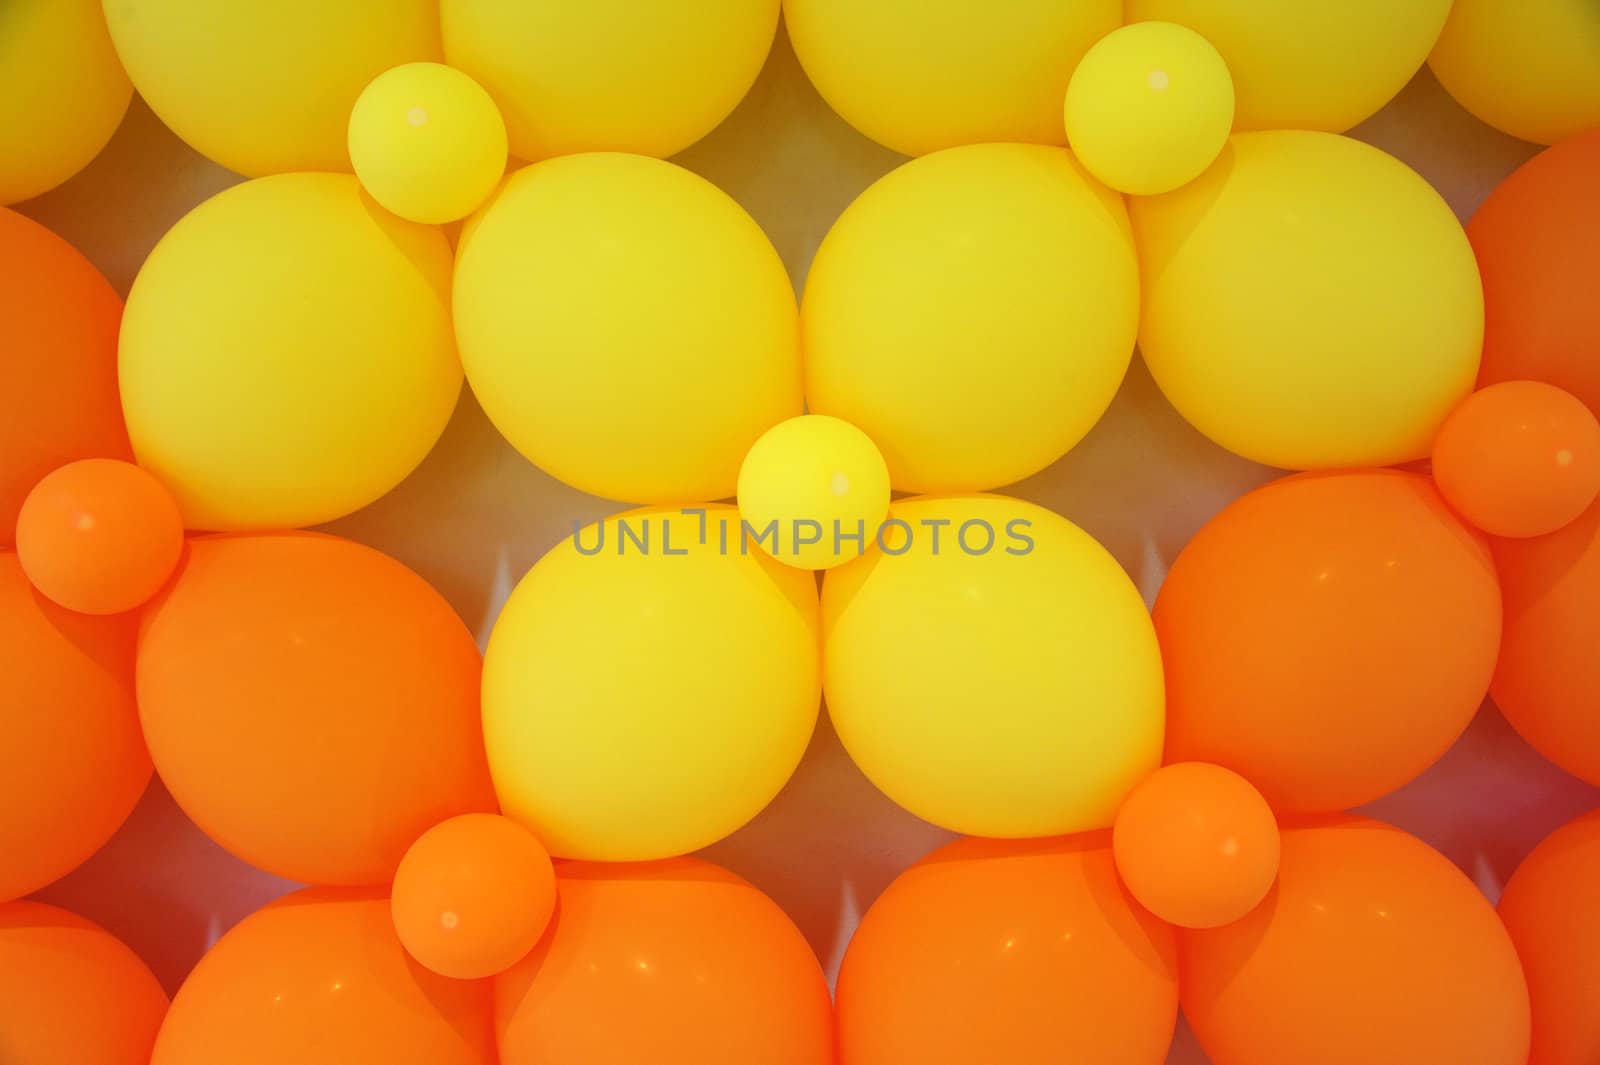 Detail from a wall of balloons